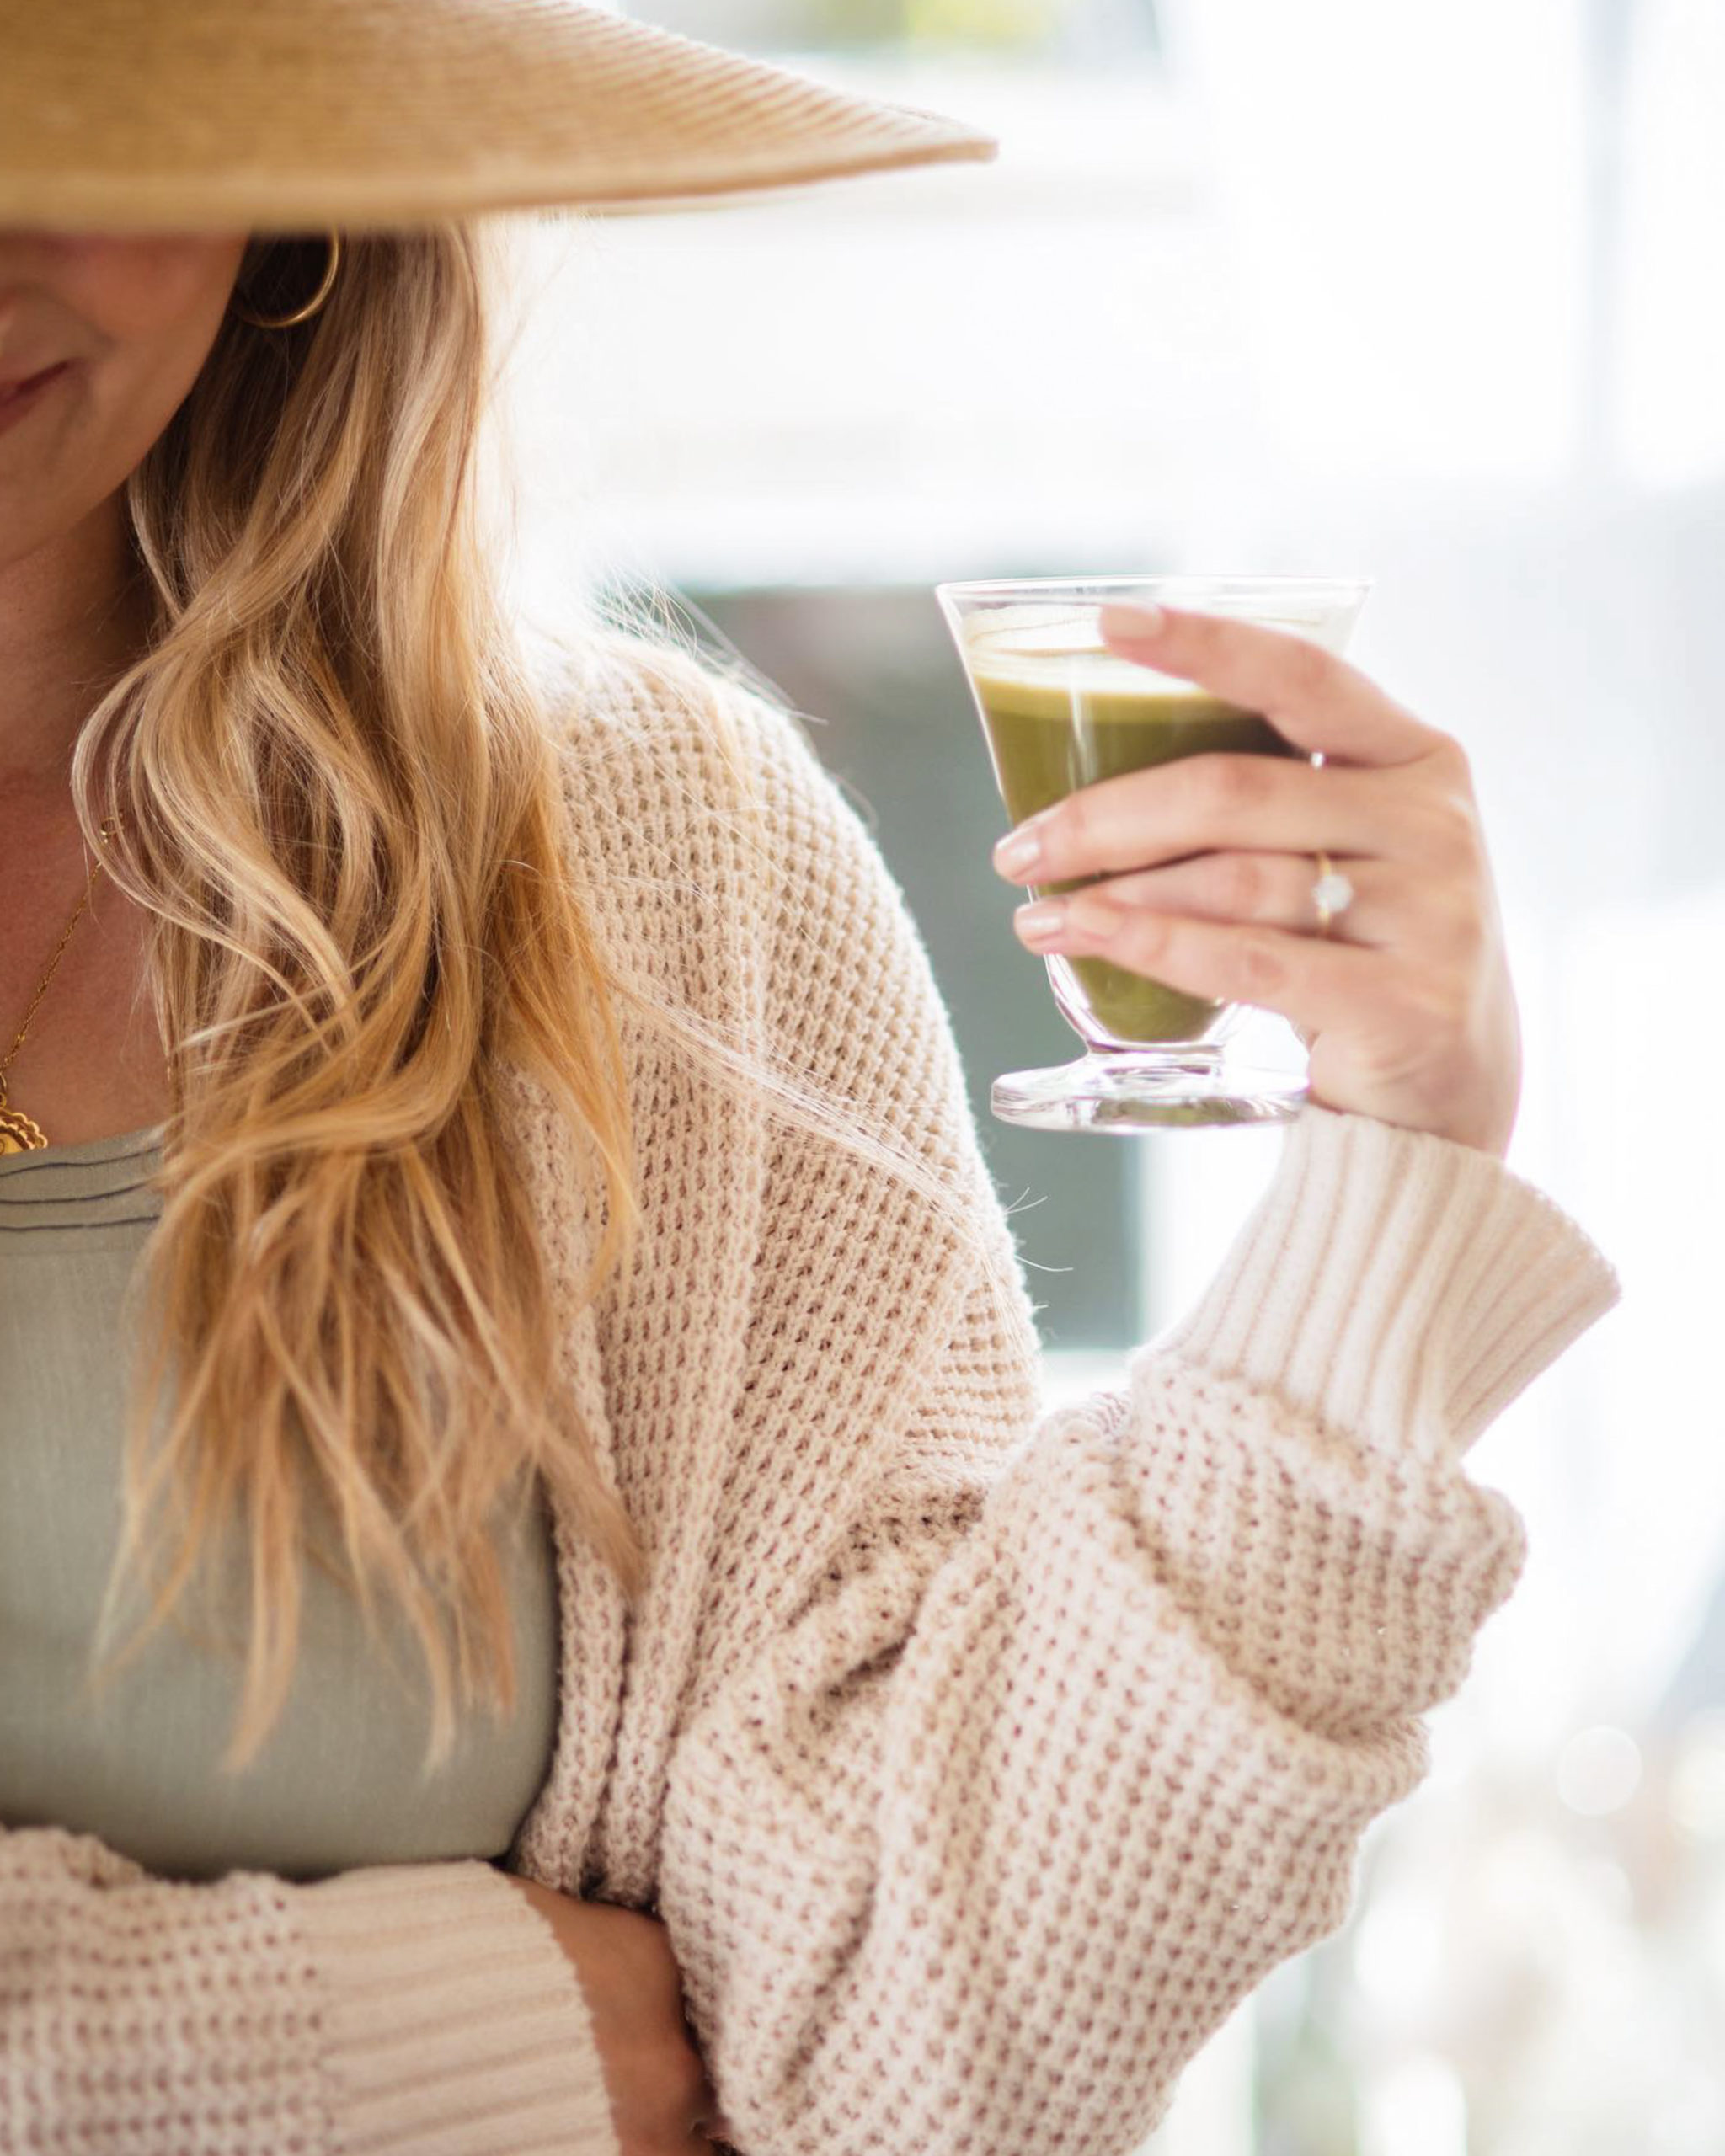 Alt text: "Smiling woman holding a green smoothie, looking refreshed and rejuvenated. She may have just used one of the 7 ways to quickly get out of a creative rut featured in the blog post by Virtual Career Girl